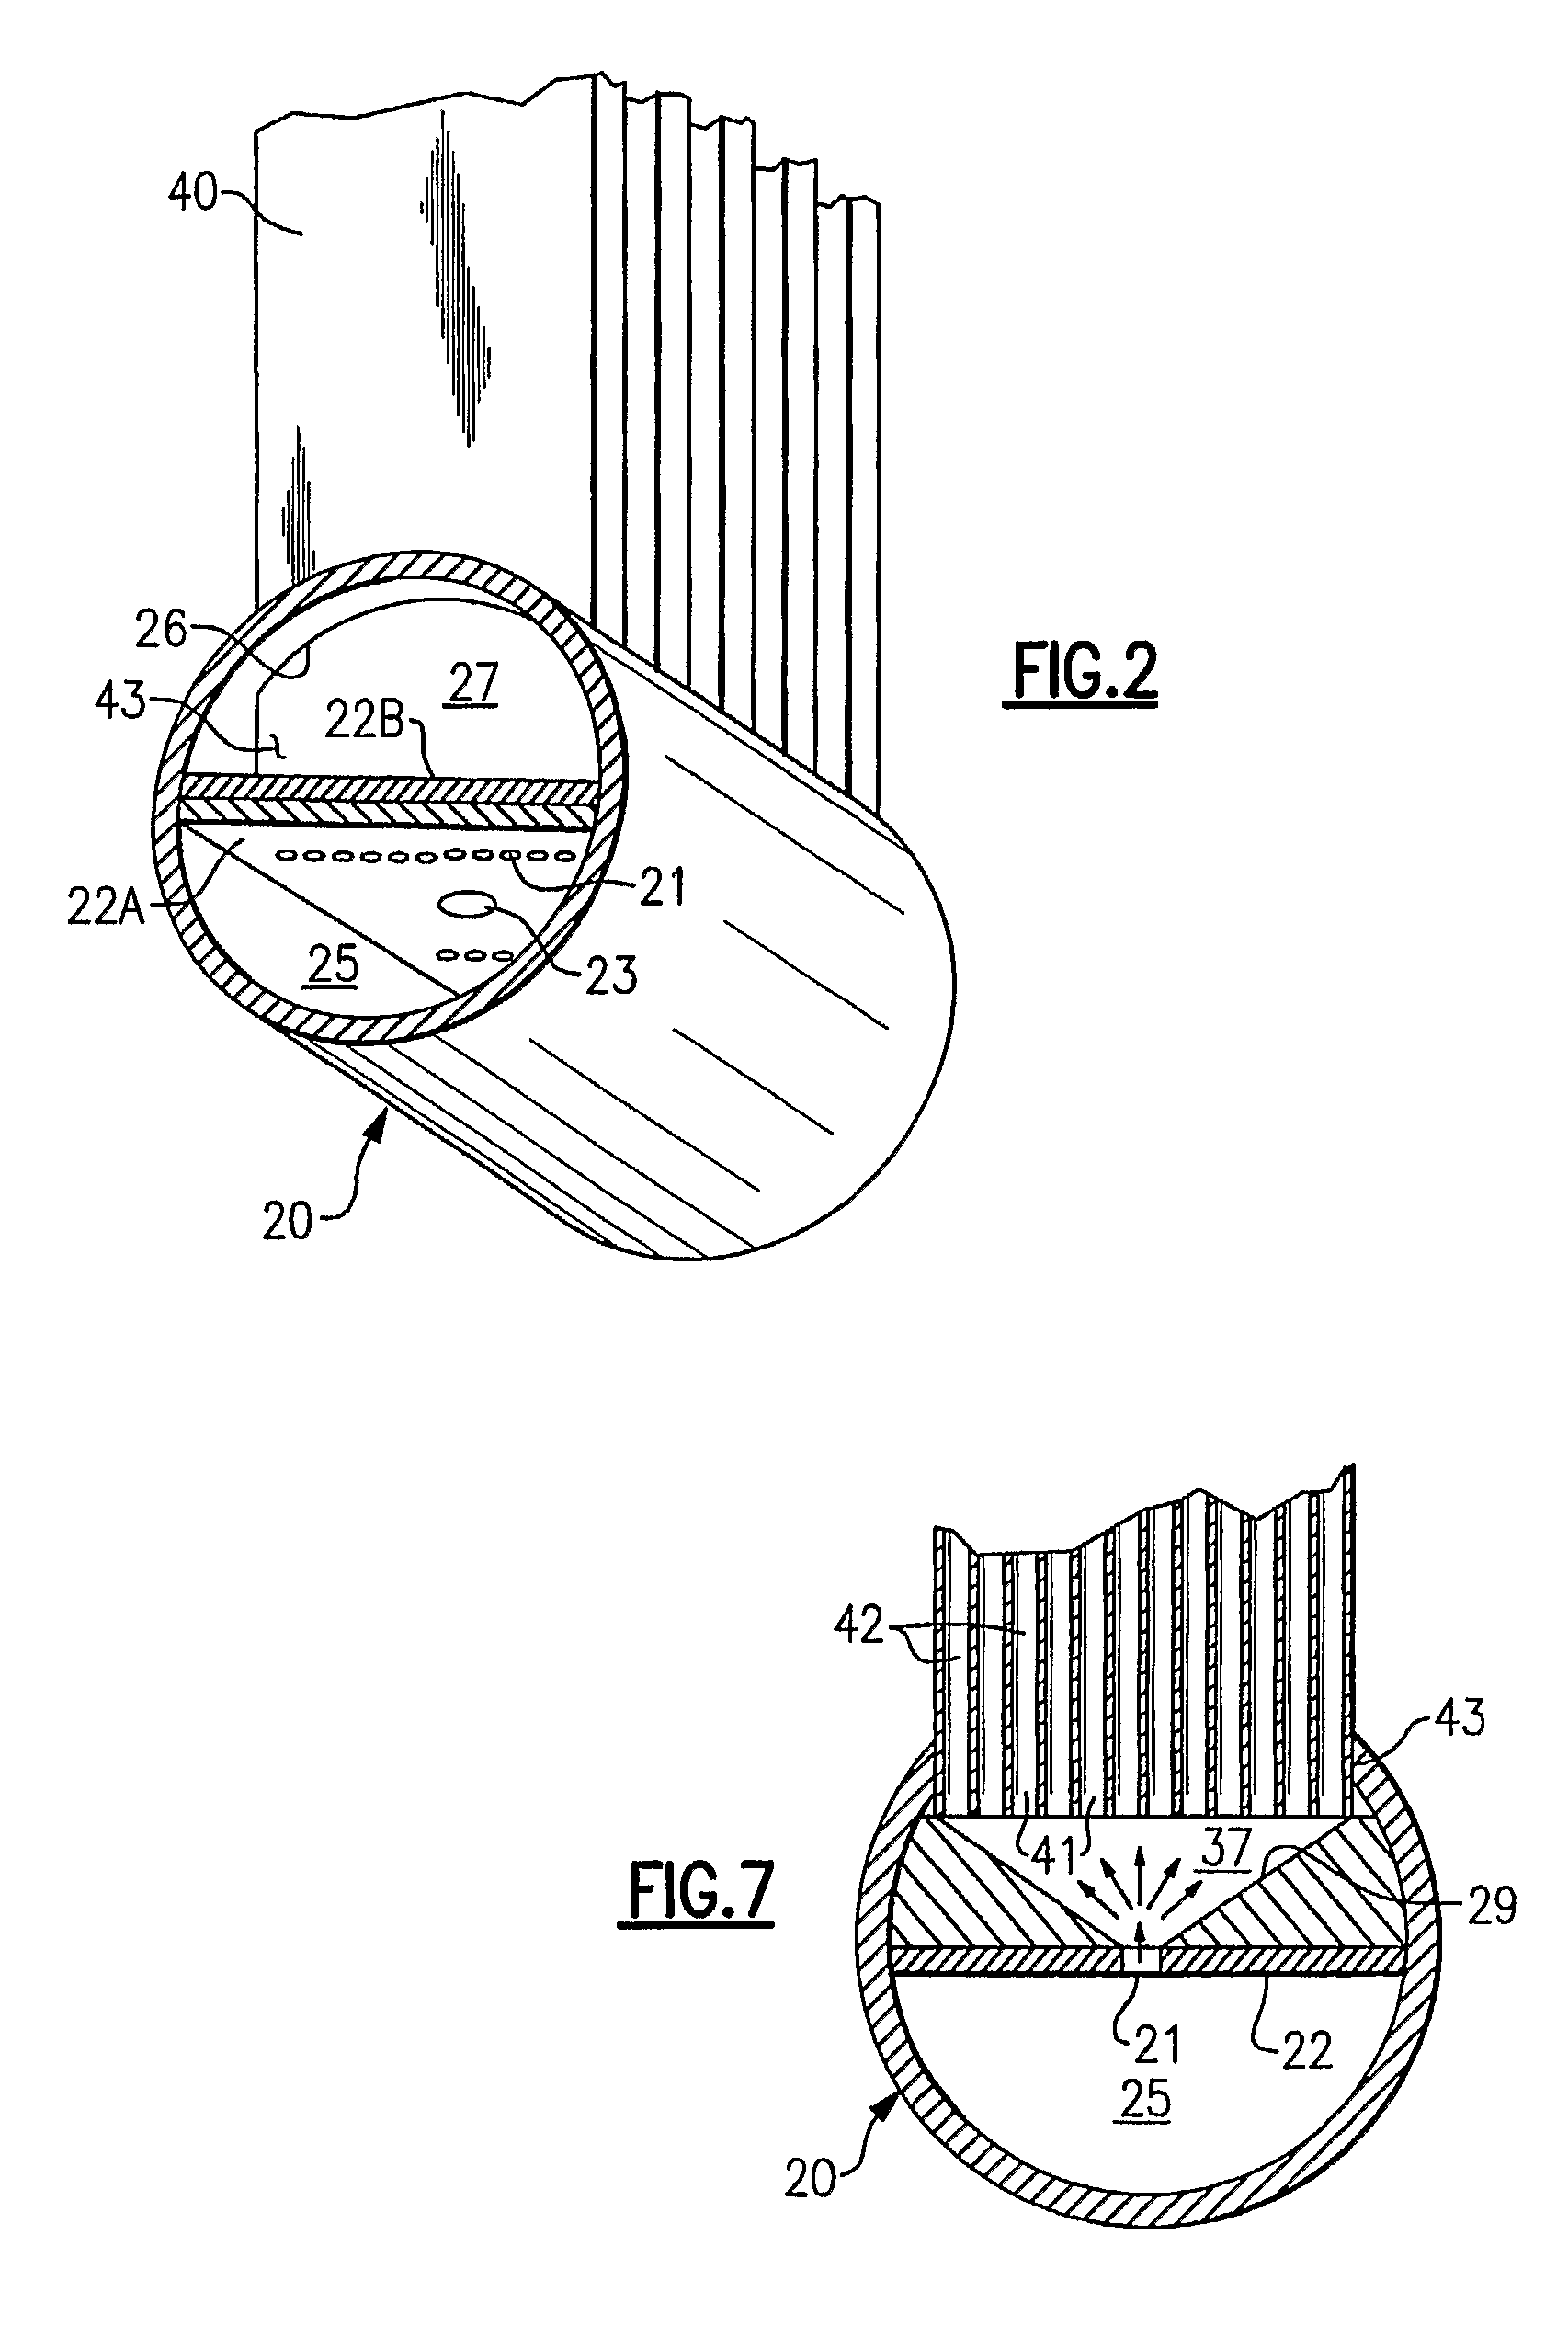 Heat Exchanger with Perforated Plate in Header